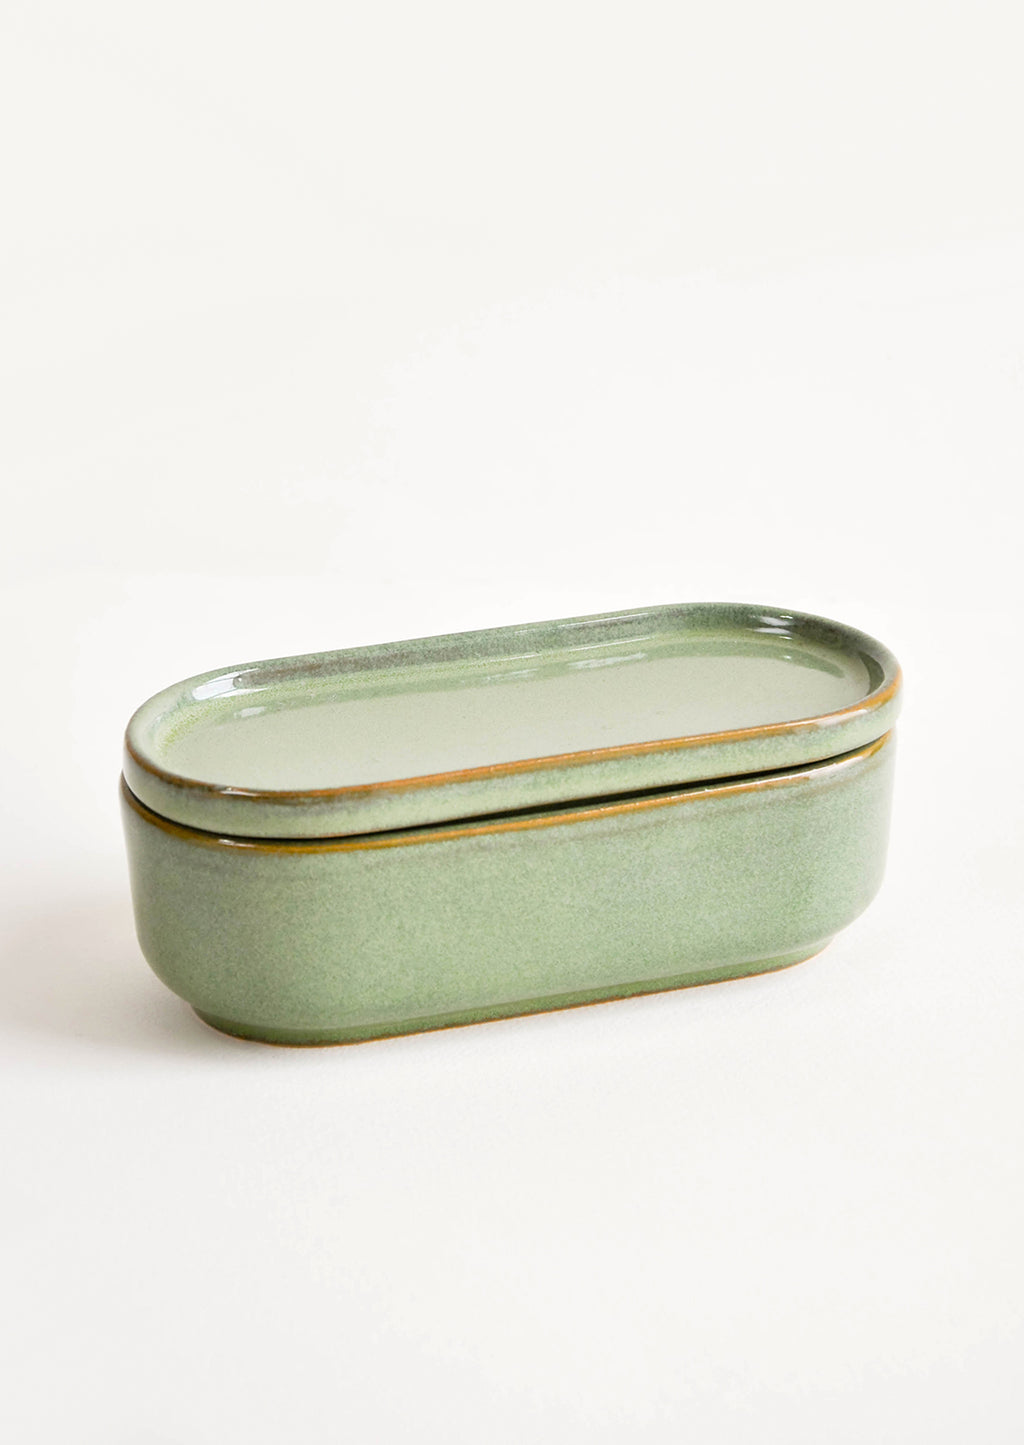 1: Oblong oval green Ceramic Container with Lid.